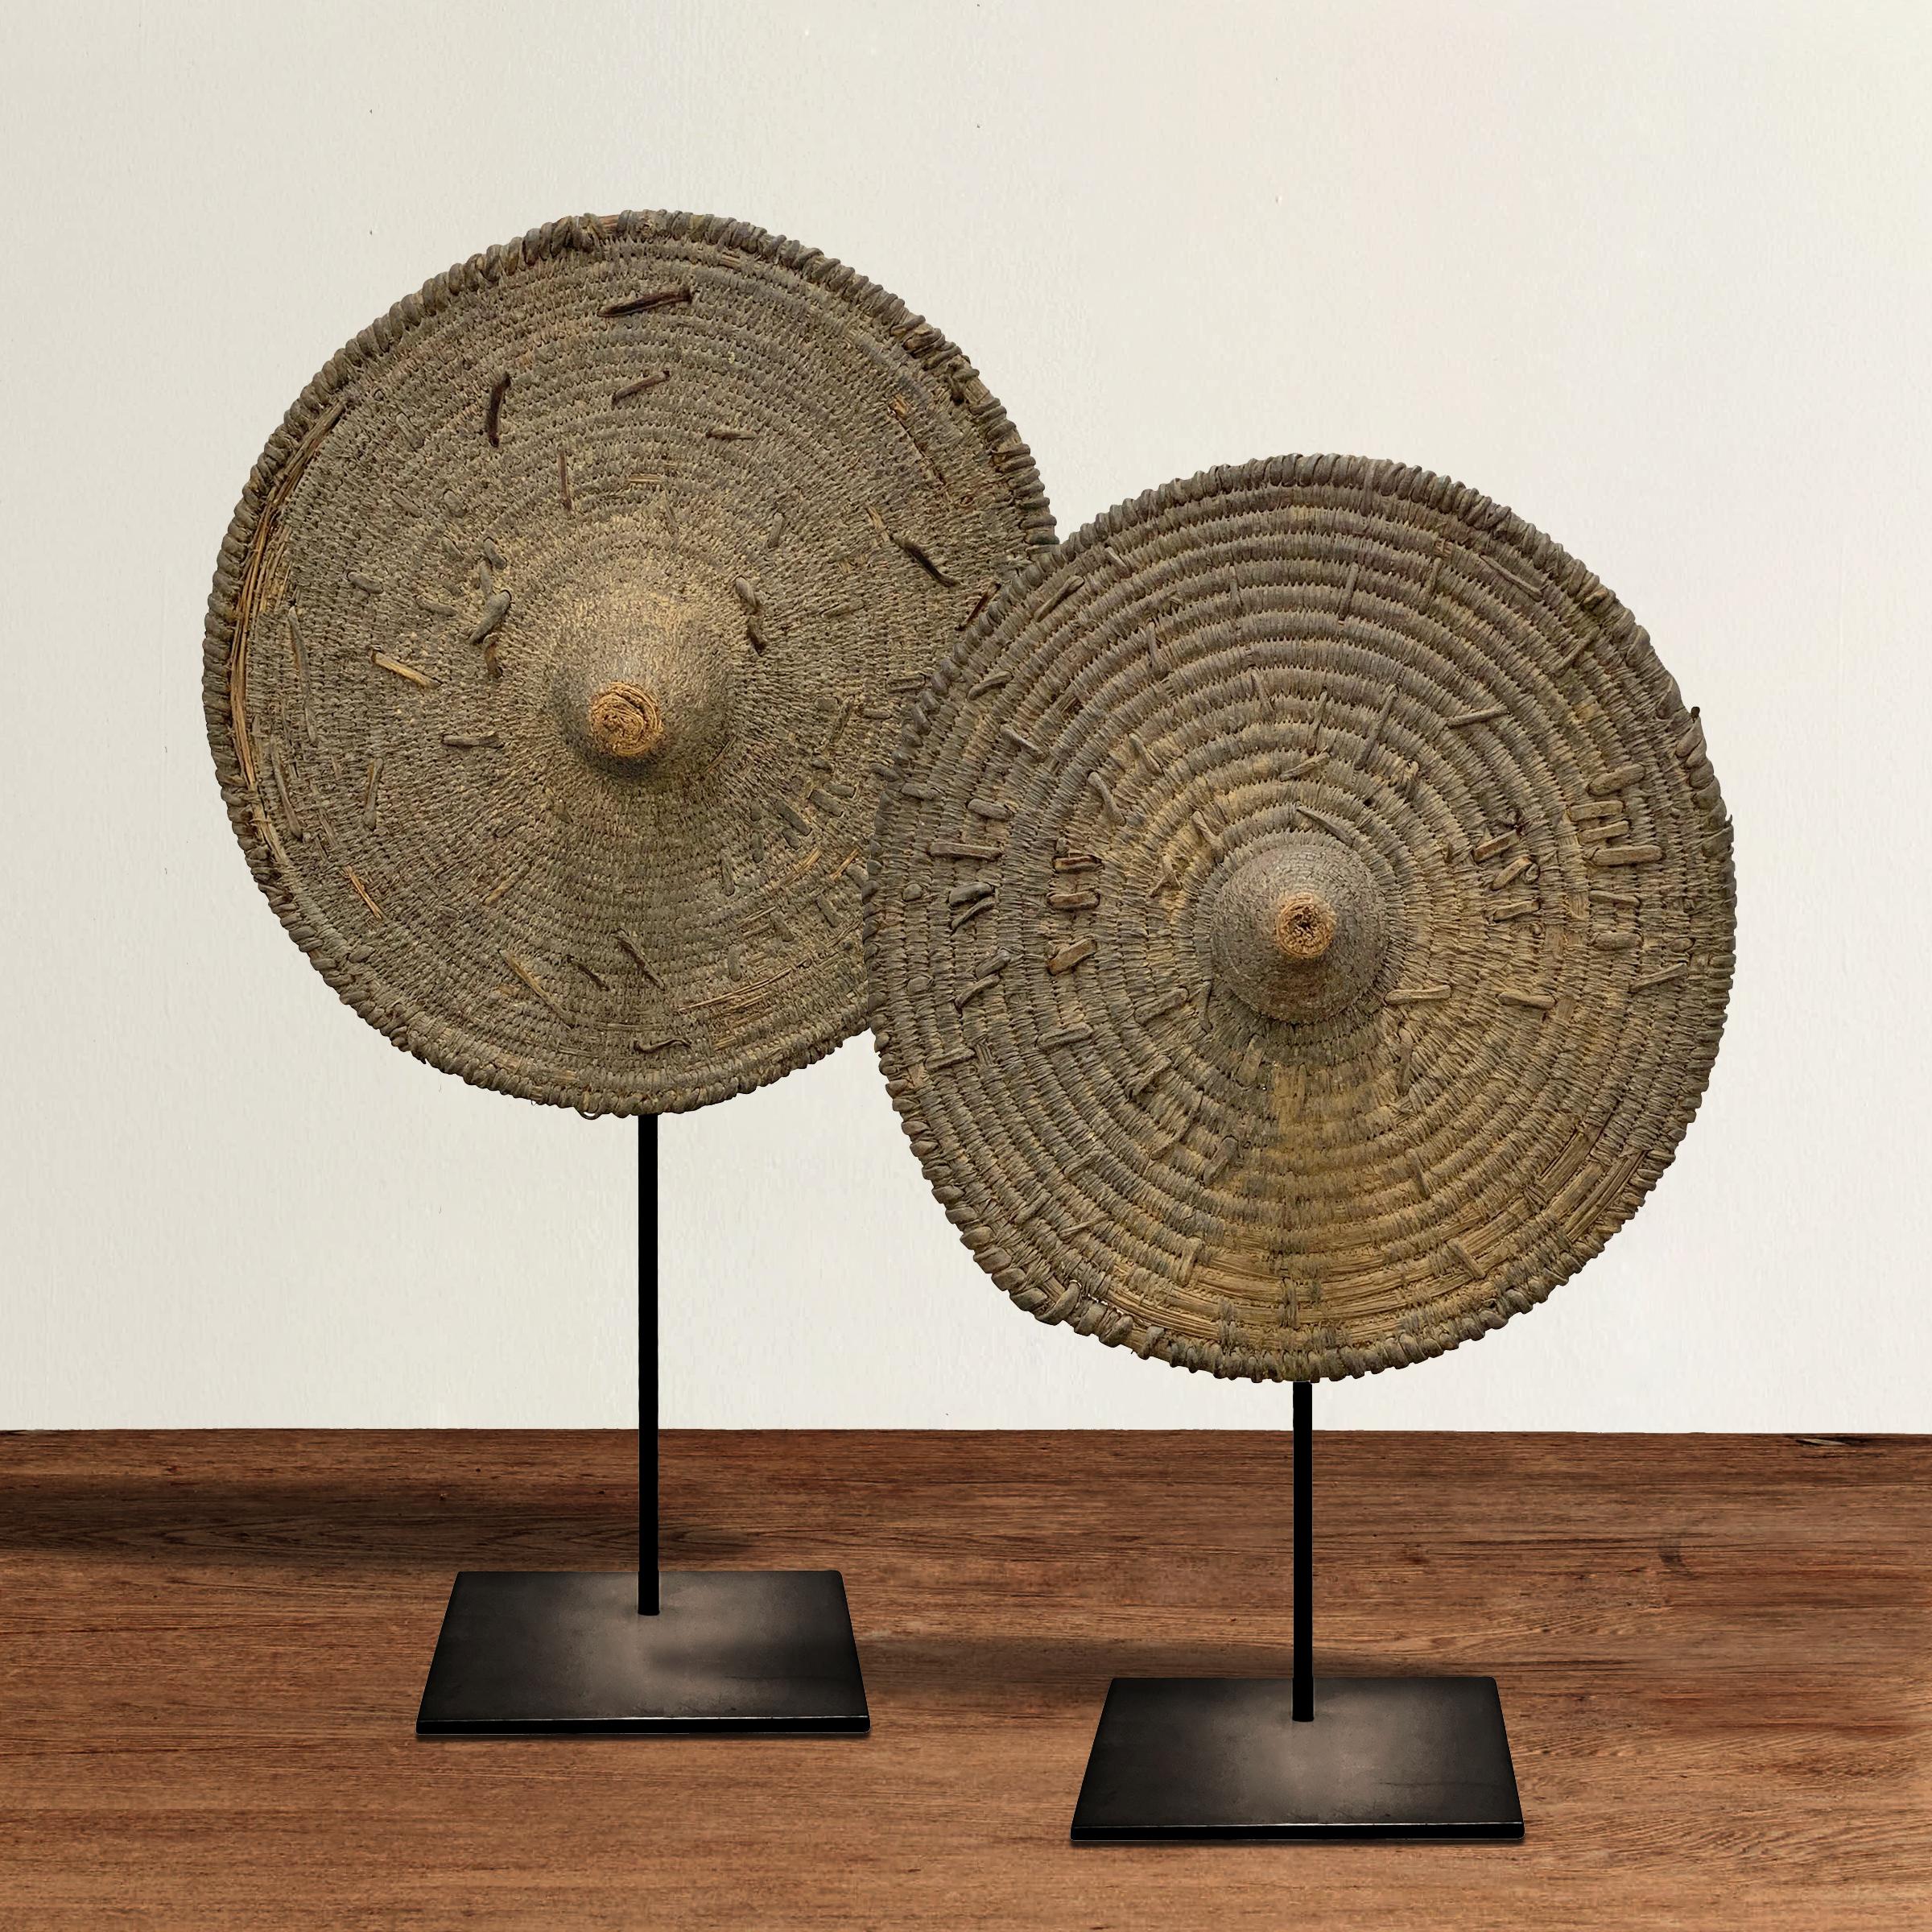 A pair of wonderfully sculptural early 20th century handwoven wicker shields from the Tamberma people of Togo, mounted on custom steel stands.